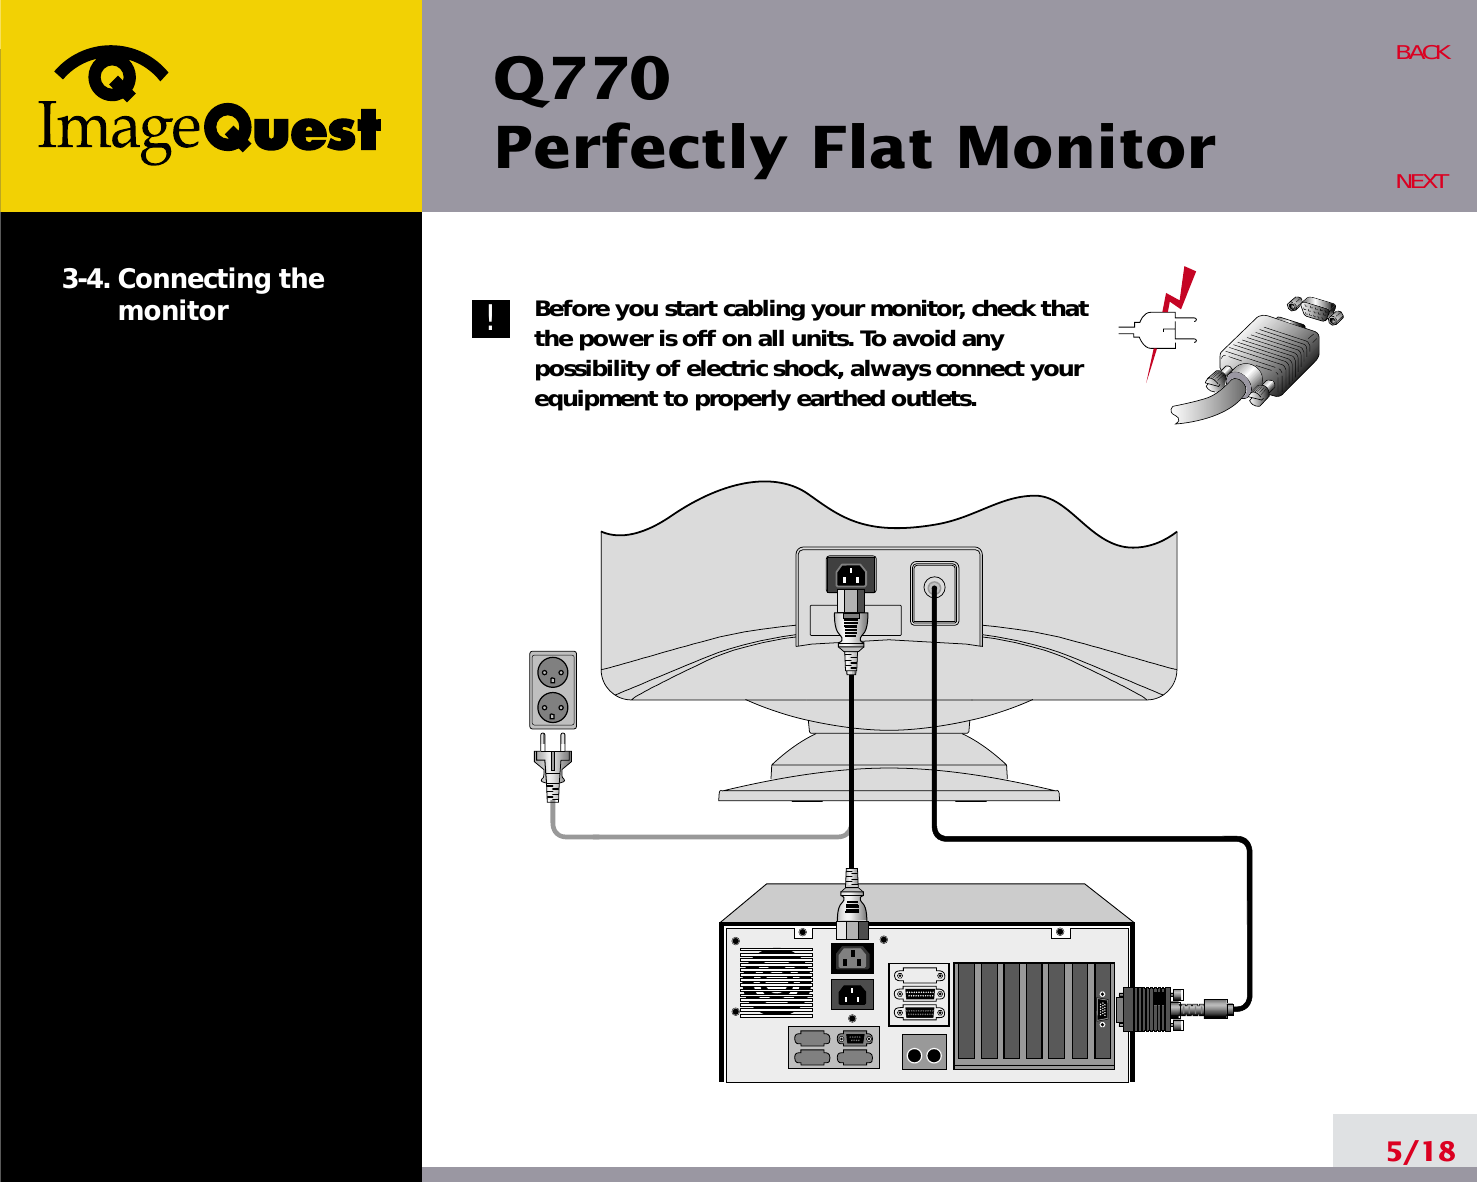 Q770Perfectly Flat Monitor5/18BACKNEXT3-4. Connecting themonitor Before you start cabling your monitor, check thatthe power is off on all units. To avoid anypossibility of electric shock, always connect yourequipment to properly earthed outlets.!